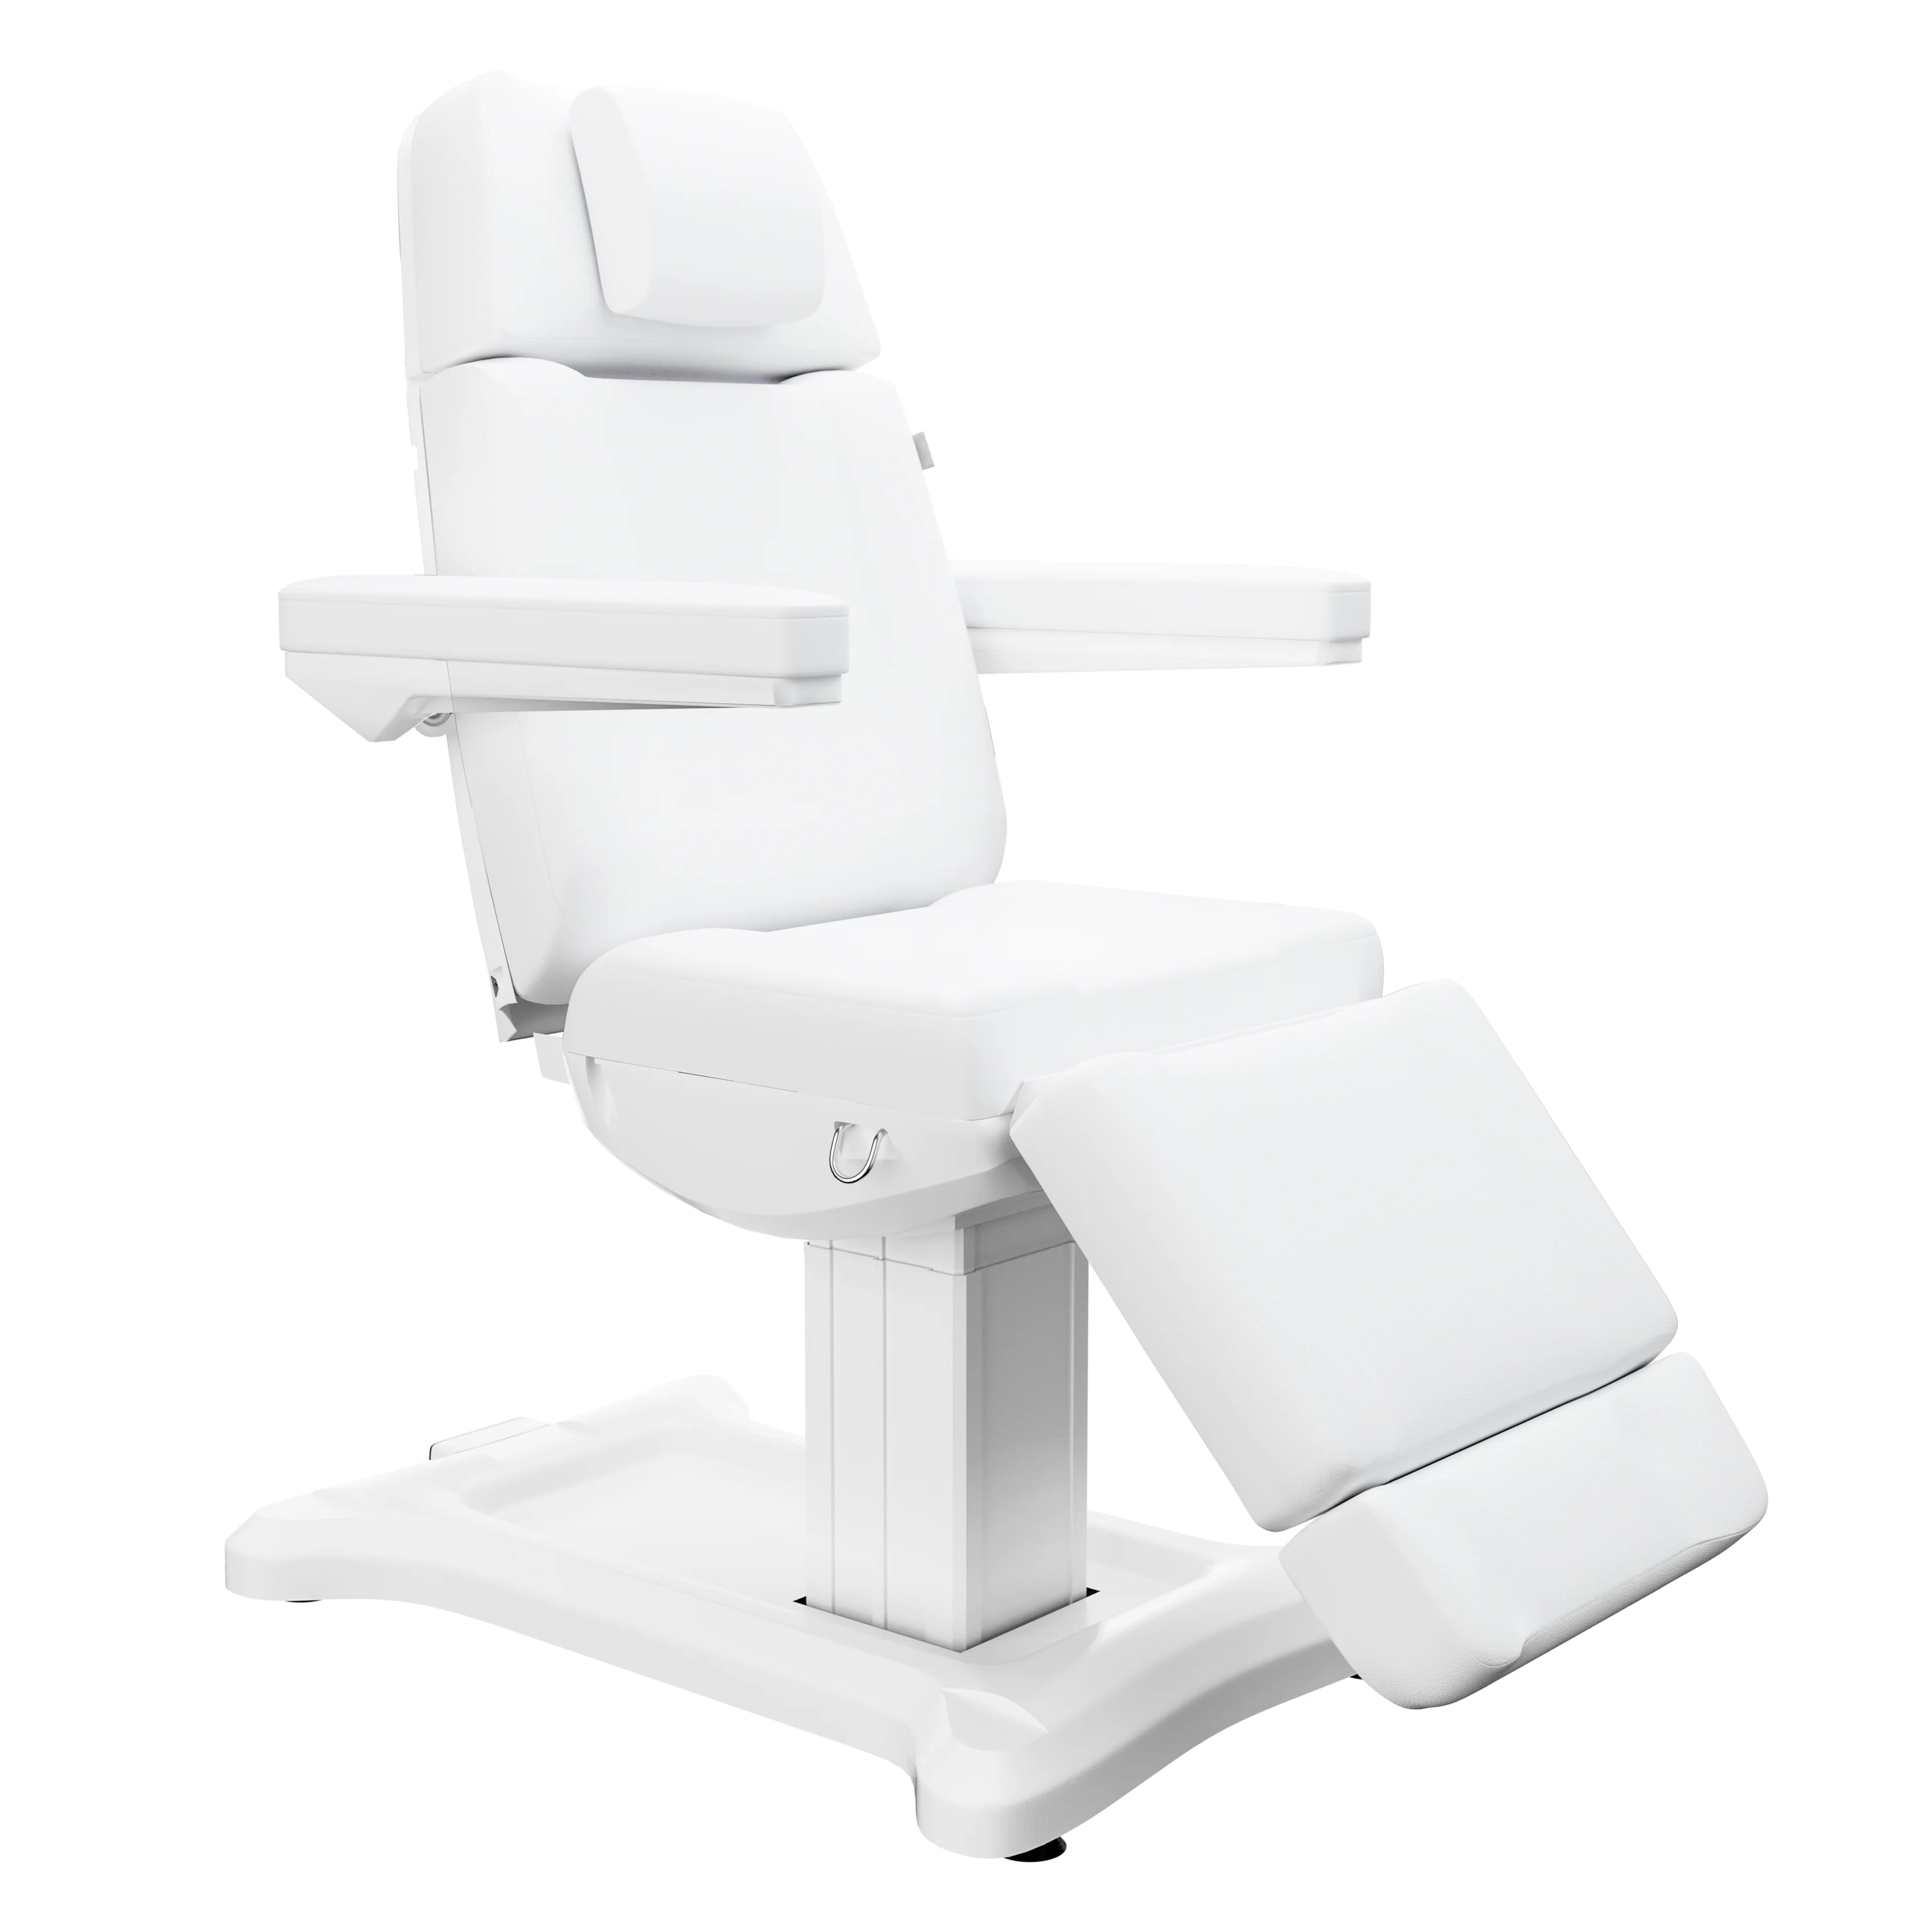 SpaMarc . Tomar (White) . 3 Motor Spa Treatment Chair / Bed